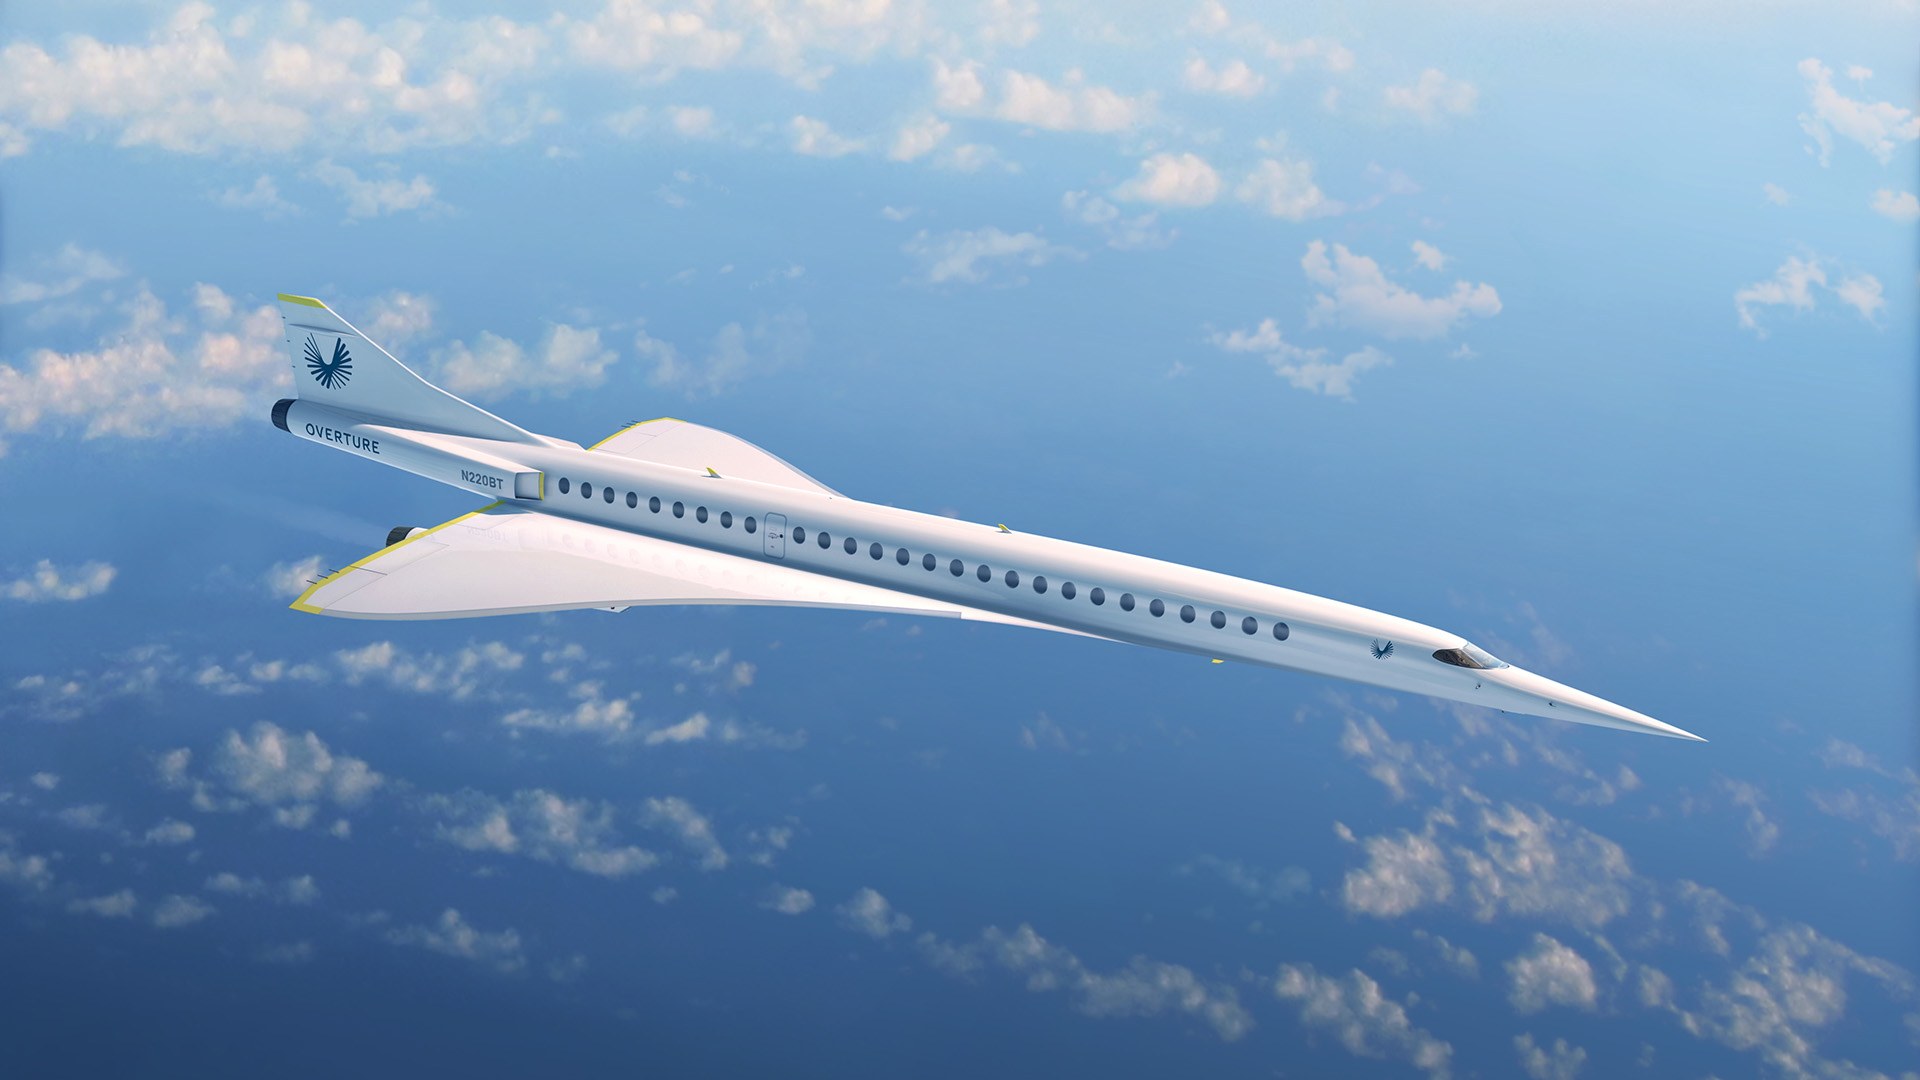 Planned passenger aircraft from Boom Supersonic